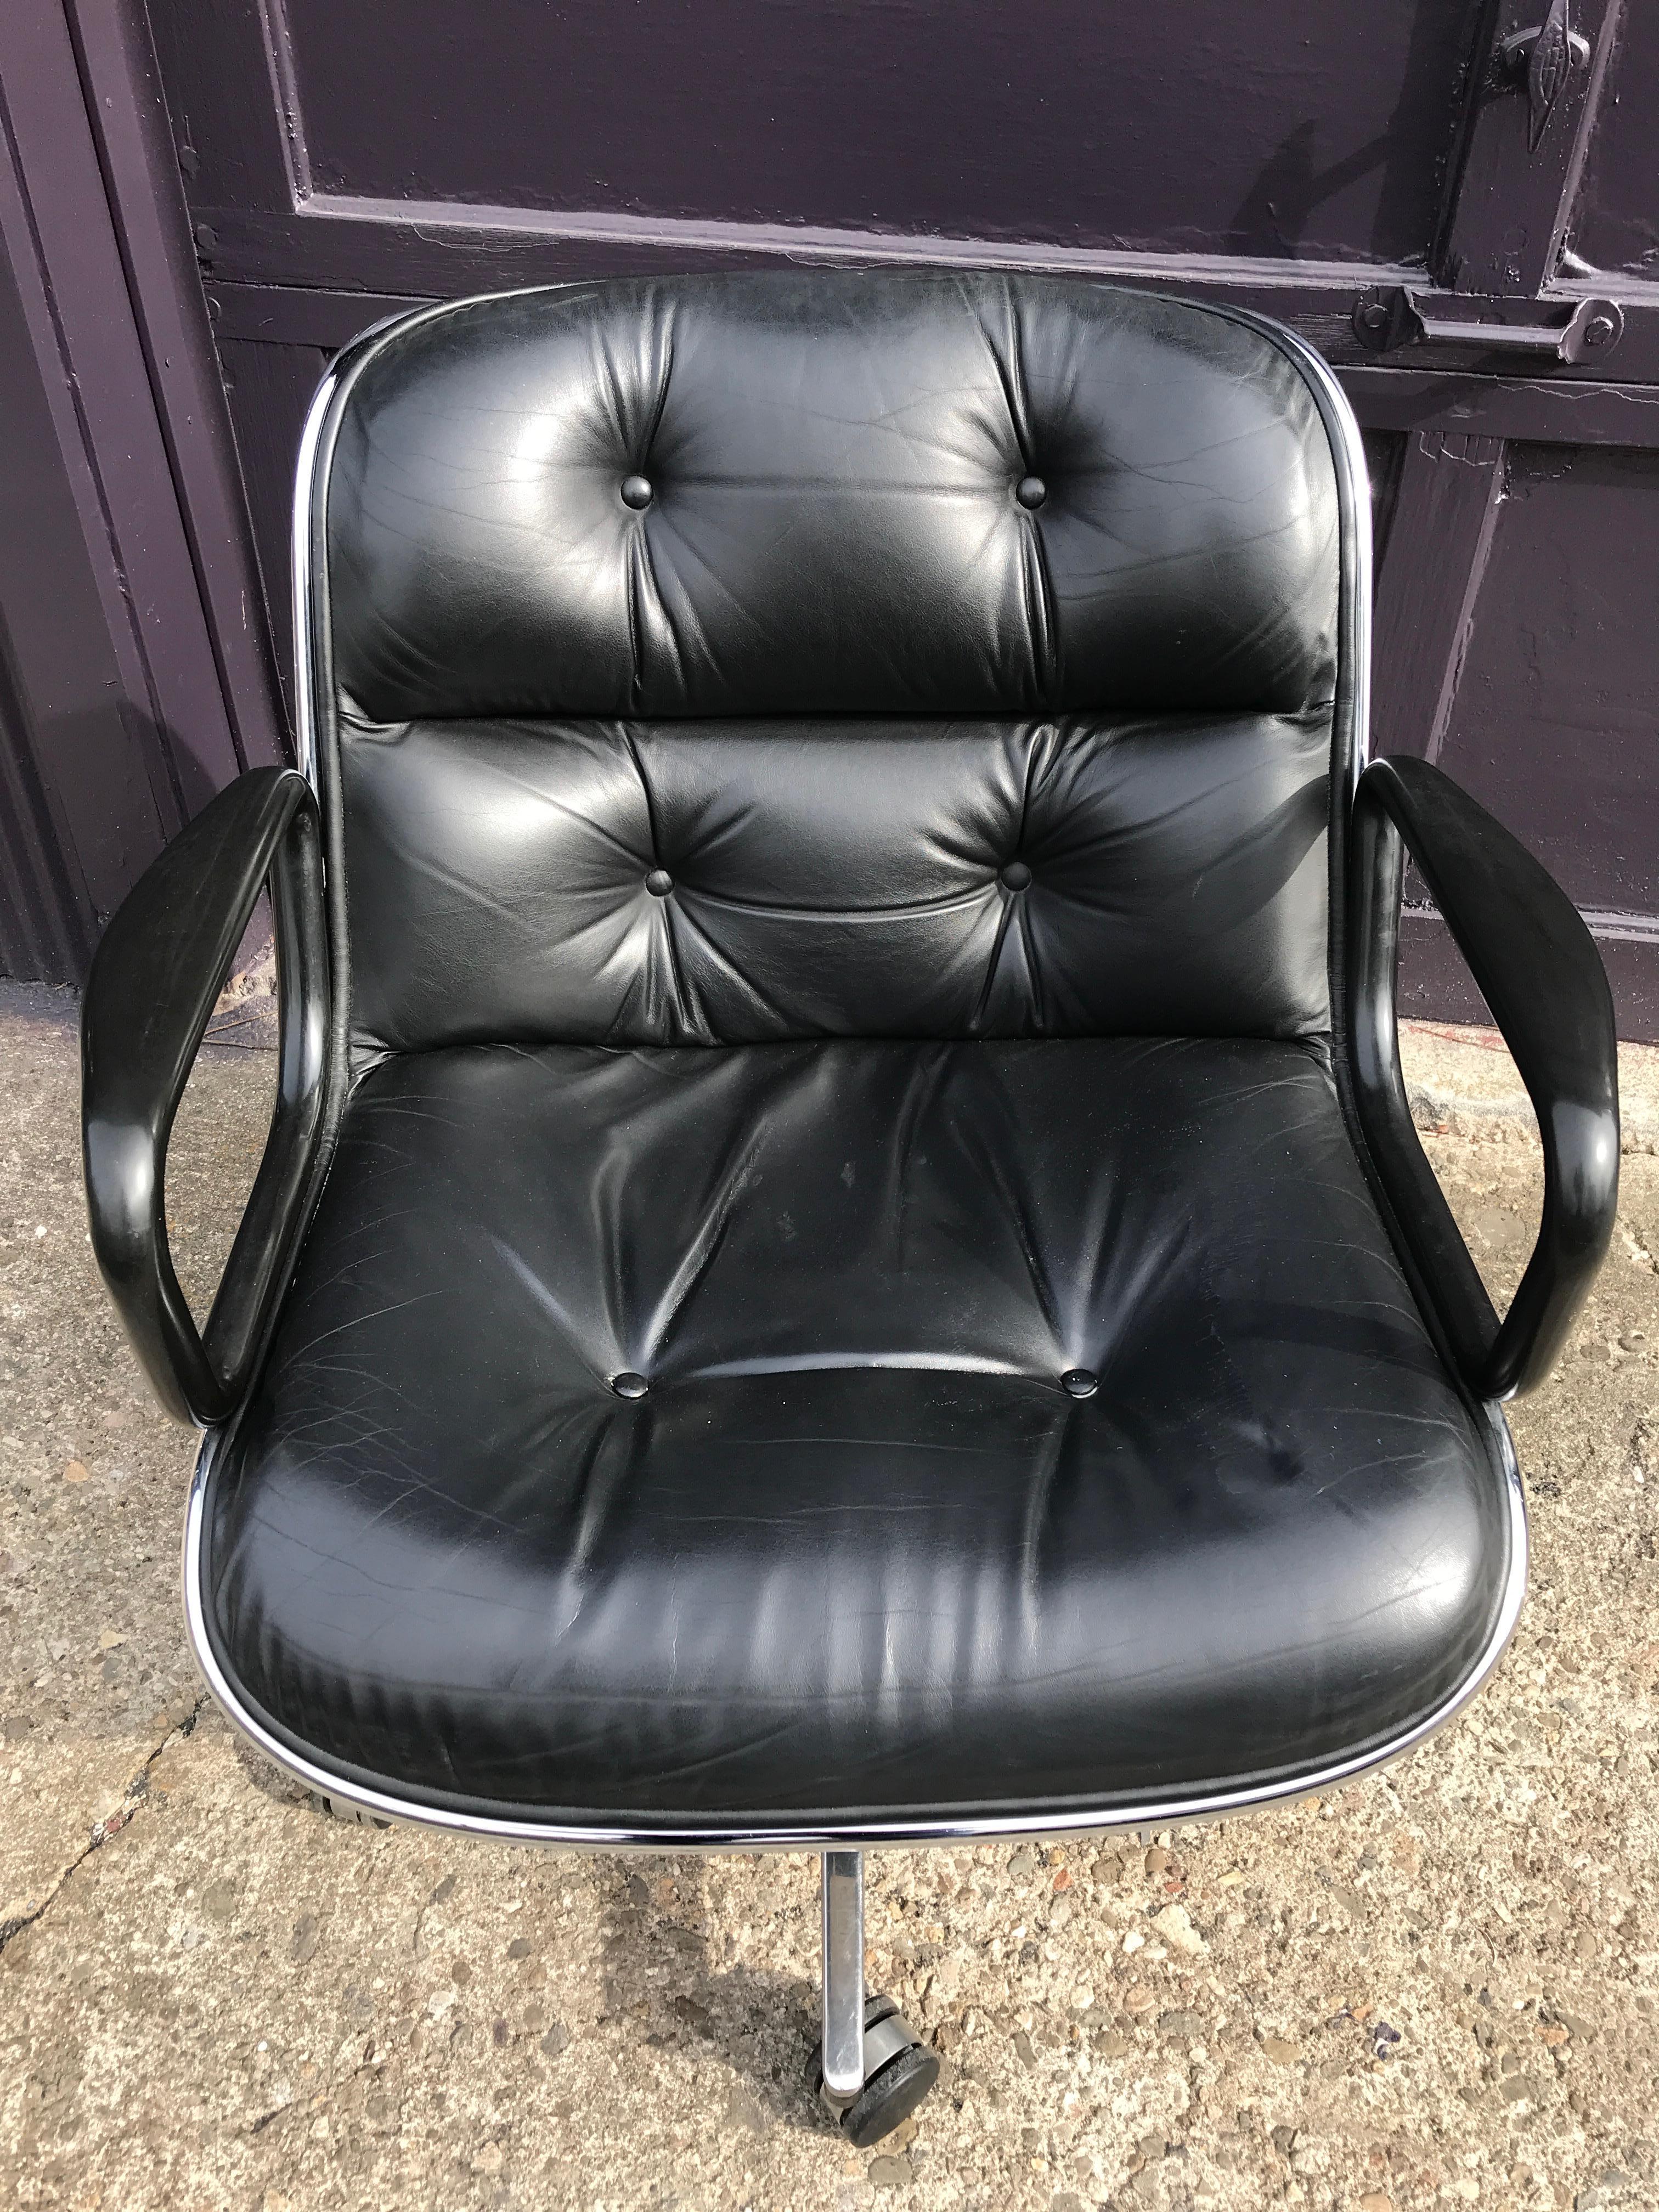 Vintage leather desk for office chair by Charles Pollock for Knoll. In good vintage condition. All wheels work as does swivel base. Original leather in good condition. Extremely comfortable and can be seen in countless shows and movies as an